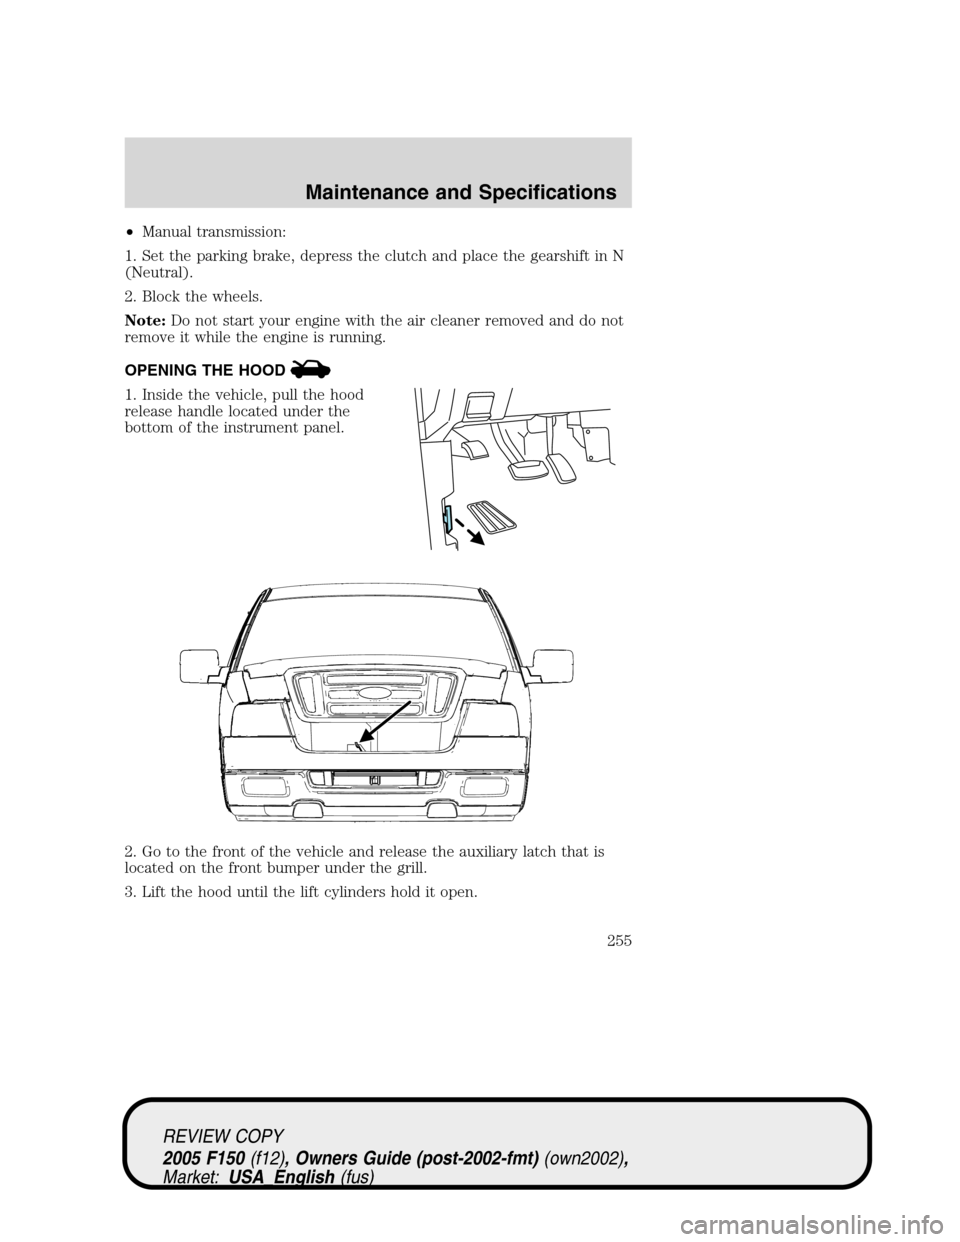 FORD F150 2005 11.G Owners Manual •Manual transmission:
1. Set the parking brake, depress the clutch and place the gearshift in N
(Neutral).
2. Block the wheels.
Note:Do not start your engine with the air cleaner removed and do not
